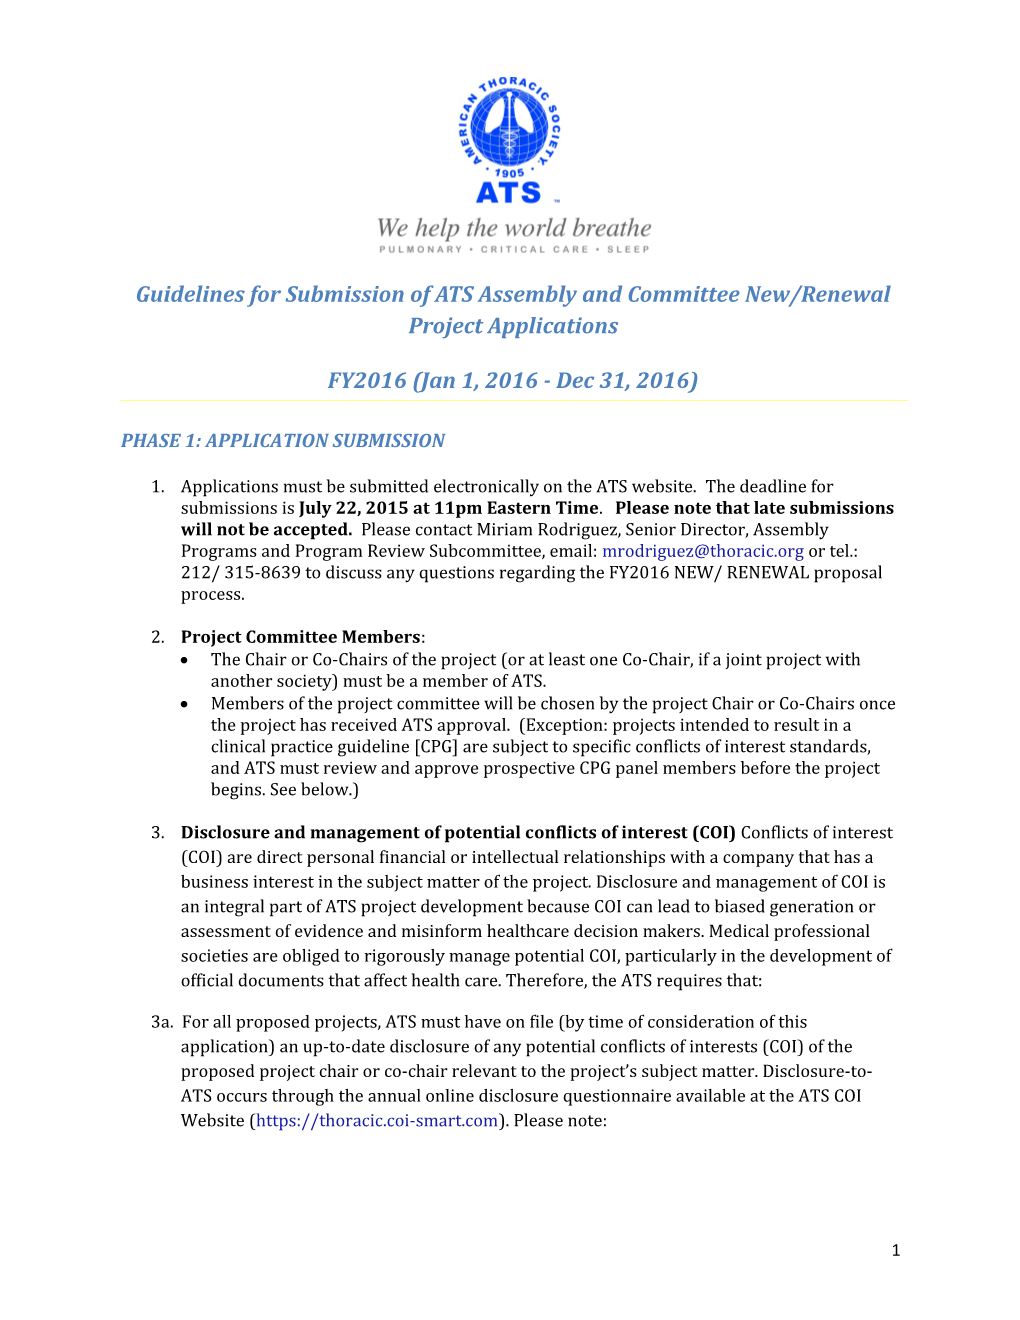 Guidelines for Submission of ATS Assembly and Committee Renewal Project Applications